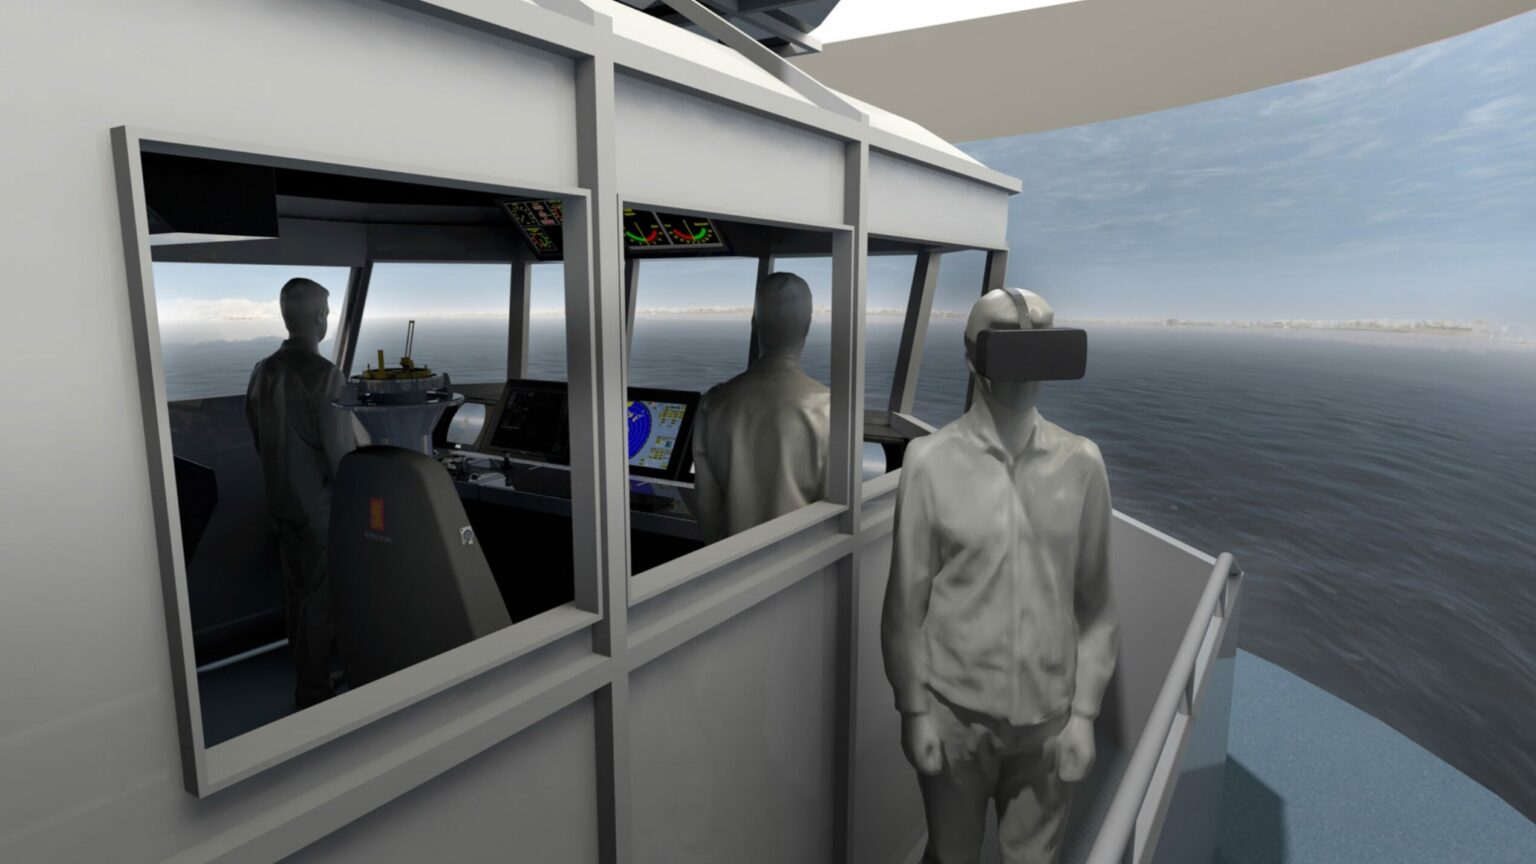 Royal Navy of the UK Has Entered Metaverse with New VR Simulators